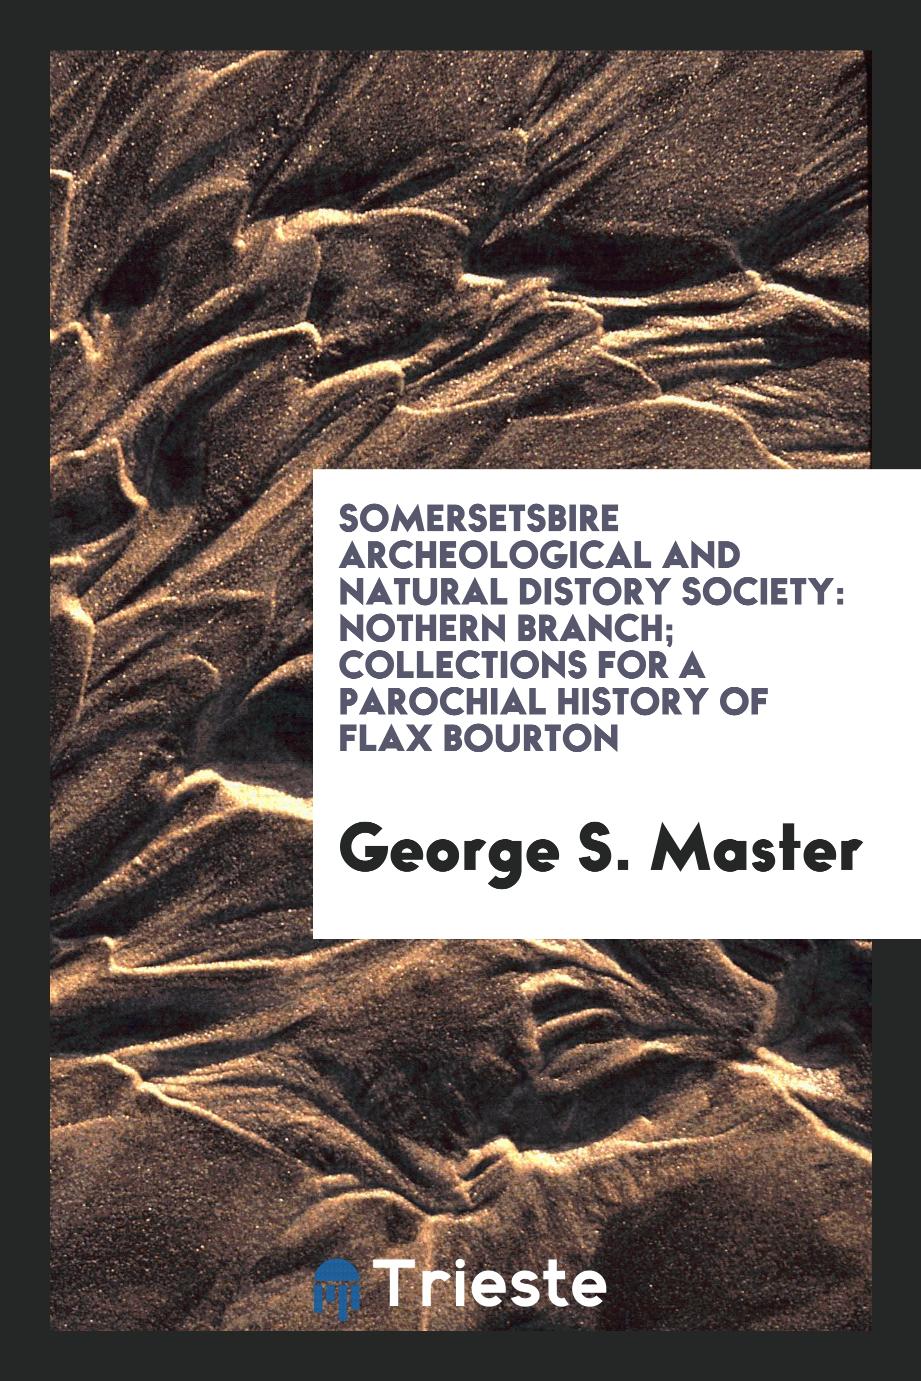 Somersetsbire Archeological and Natural Distory Society: Nothern Branch; Collections for a parochial history of Flax Bourton